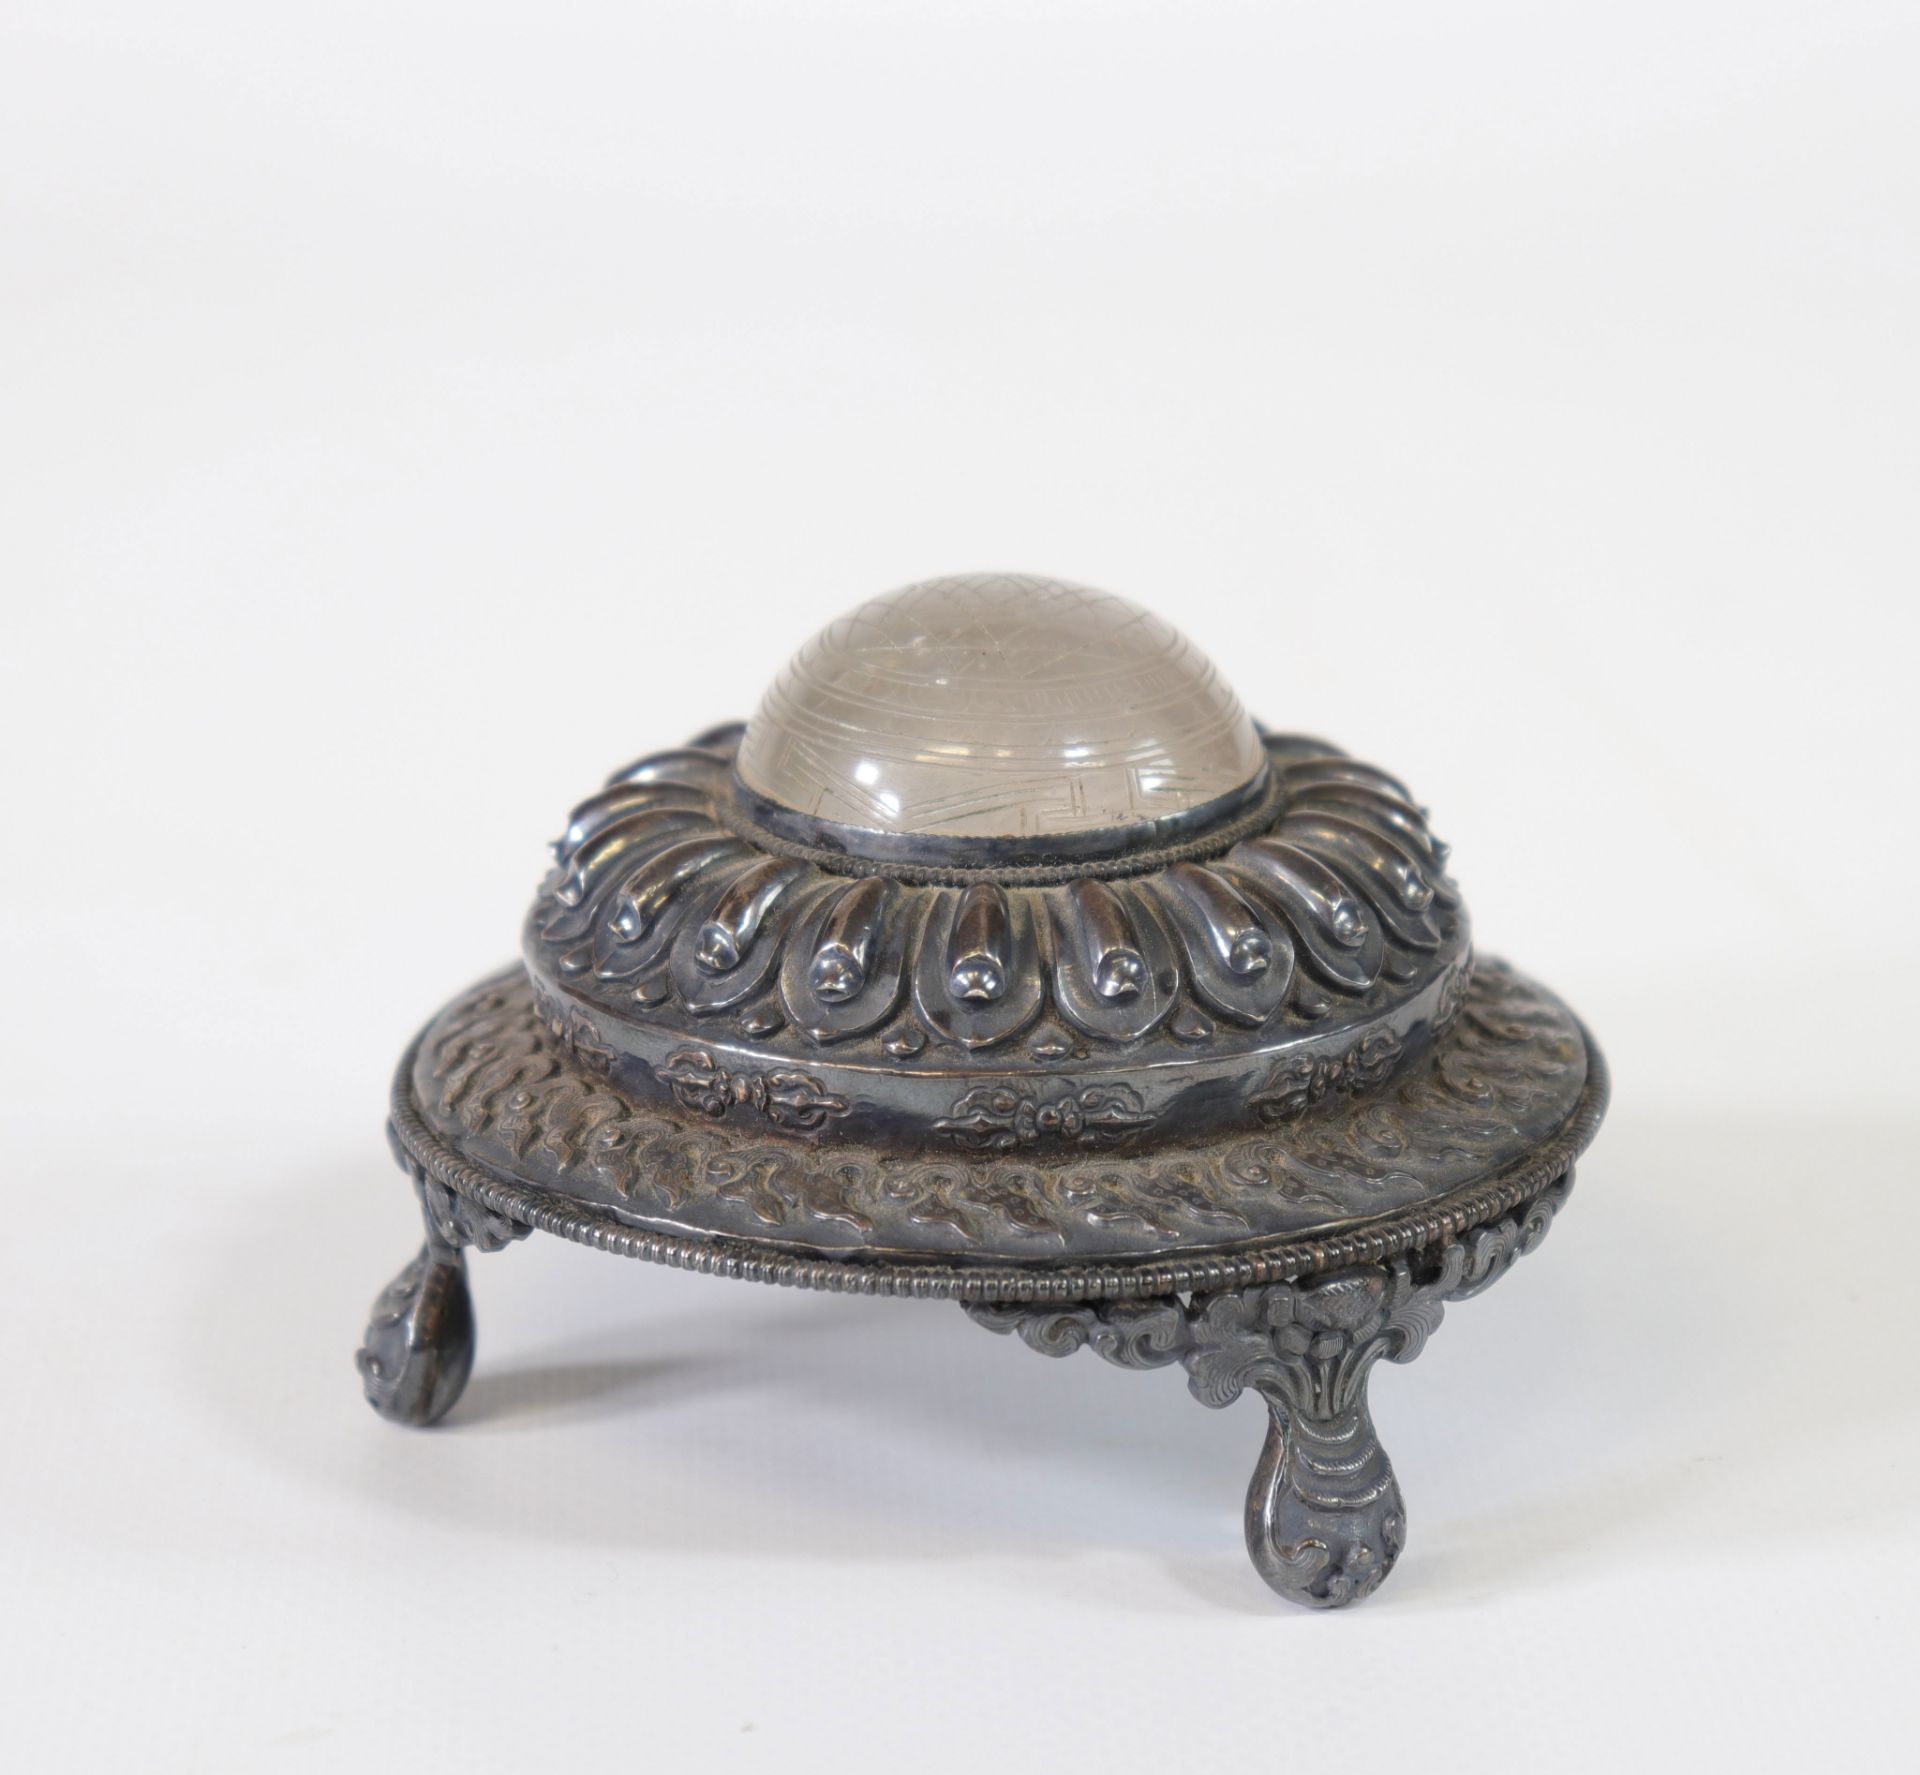 China, Silver literate object mounted on rock crystal, cut - Image 3 of 8